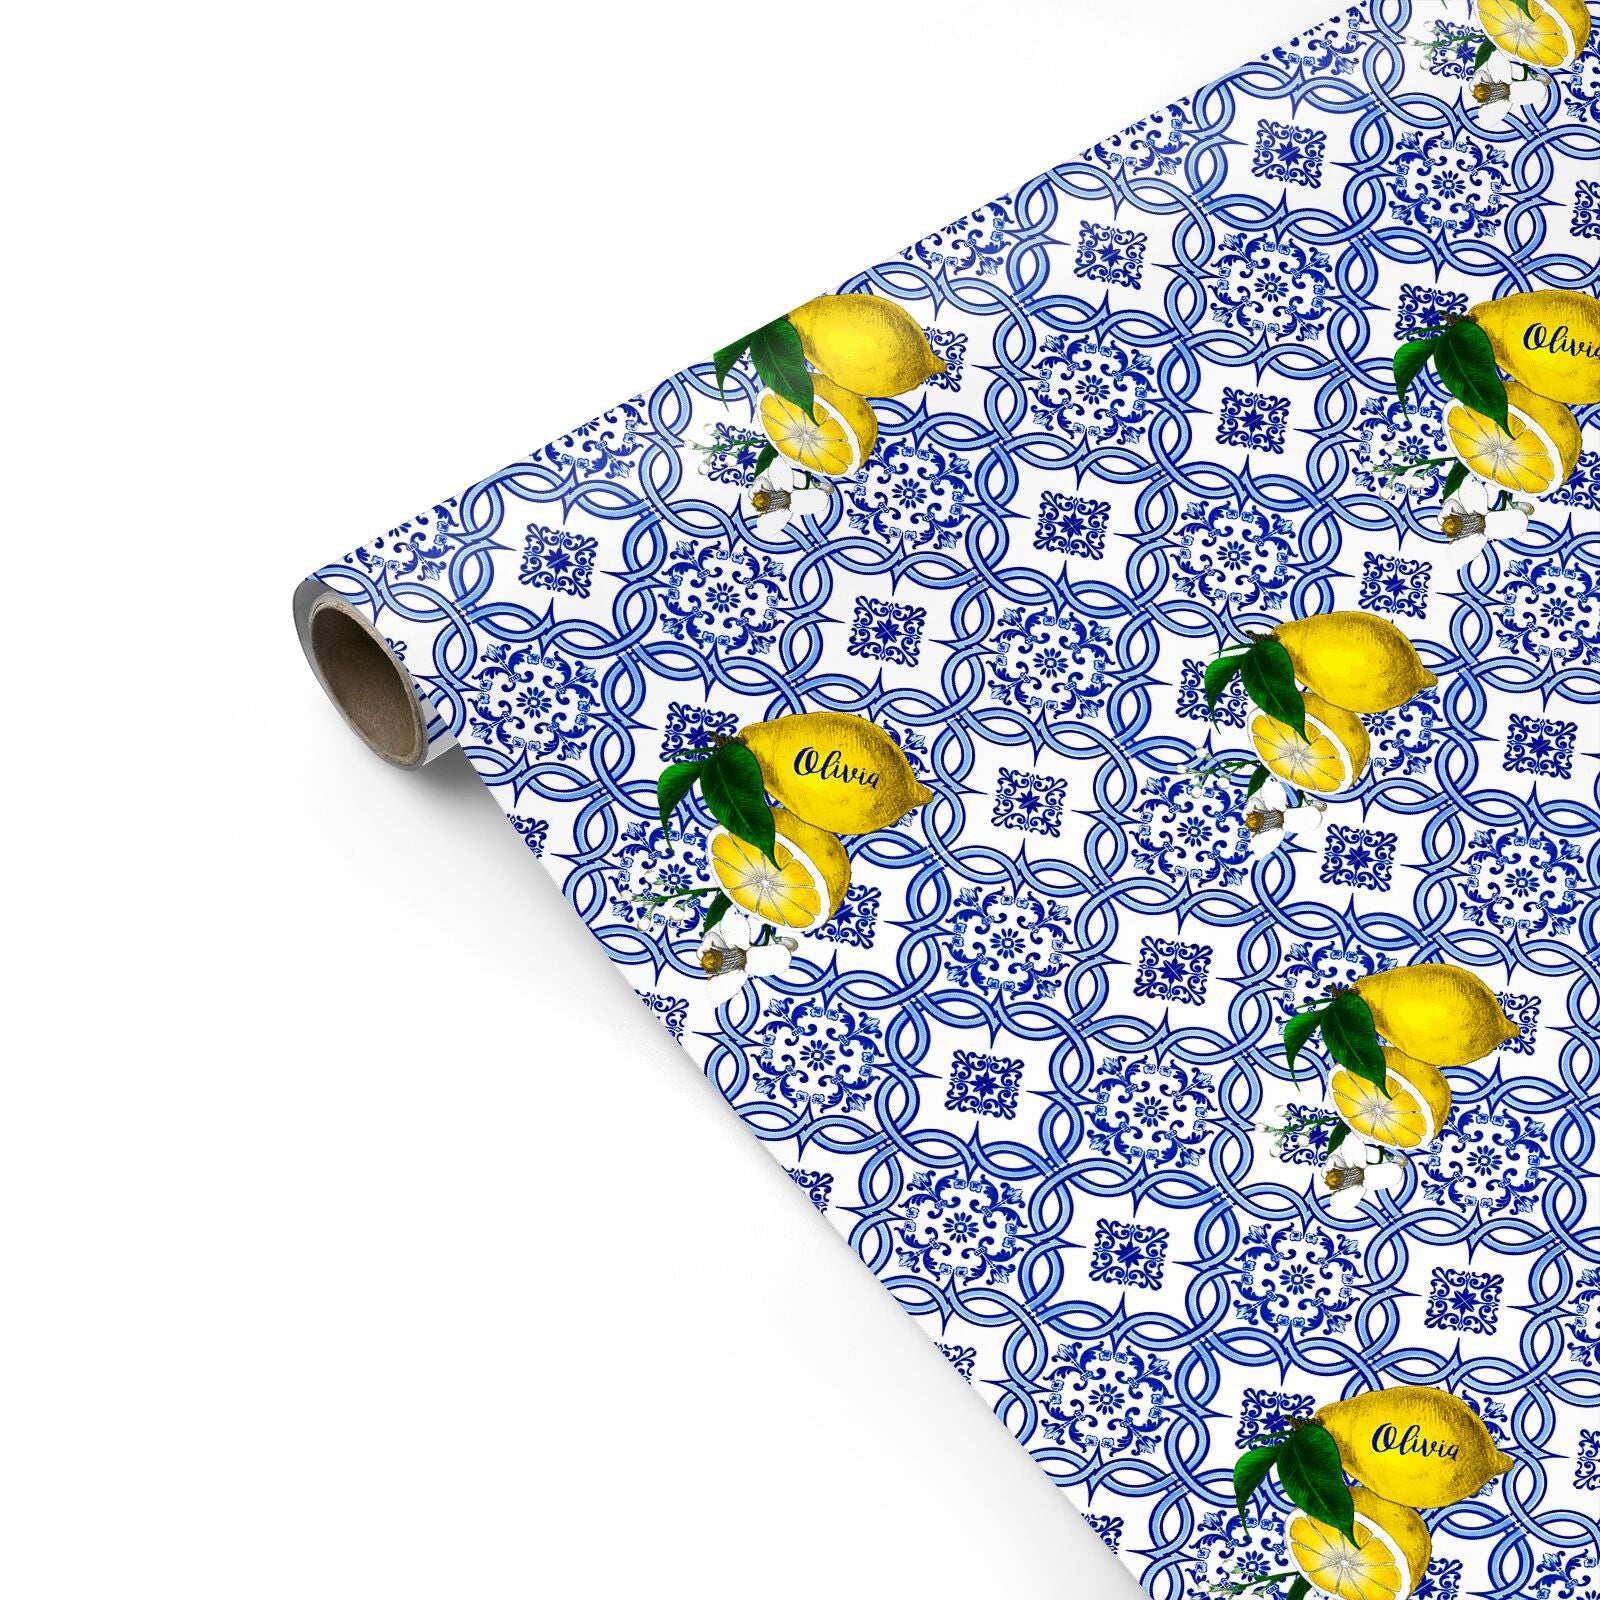  ECOARTTE Lemons and Moroccan Tile Wrapping Paper set